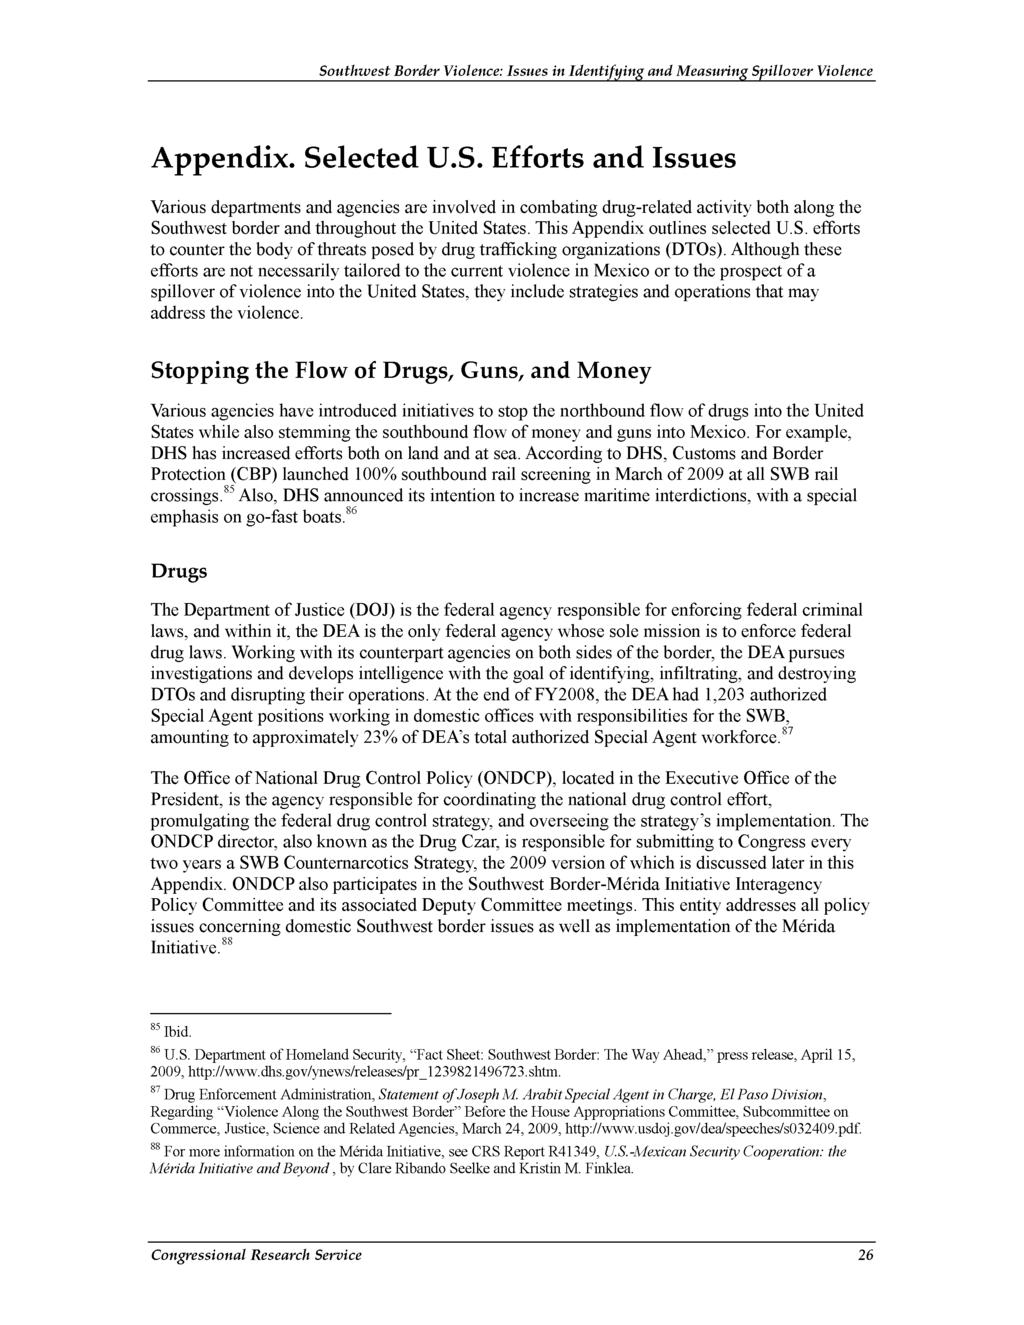 Appendix. Selected U.S. Efforts and Issues Various departments and agencies are involved in combating drug-related activity both along the Southwest border and throughout the United States.